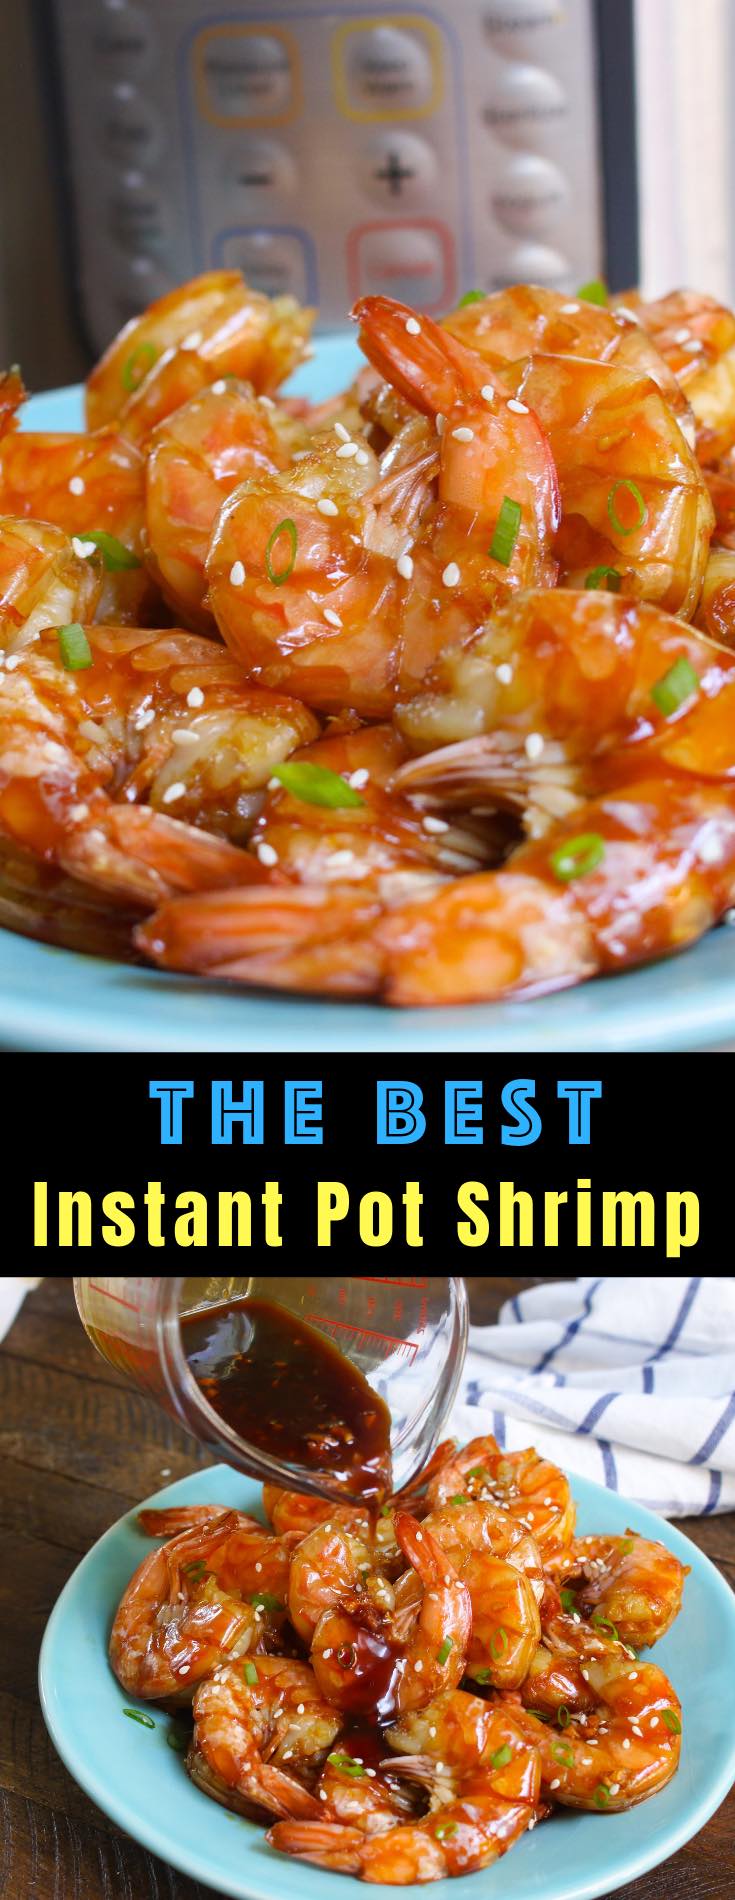 Instant Pot Shrimp with a delicious honey garlic sauce for an easy weeknight dinner or appetizer that's ready in just 15 minutes